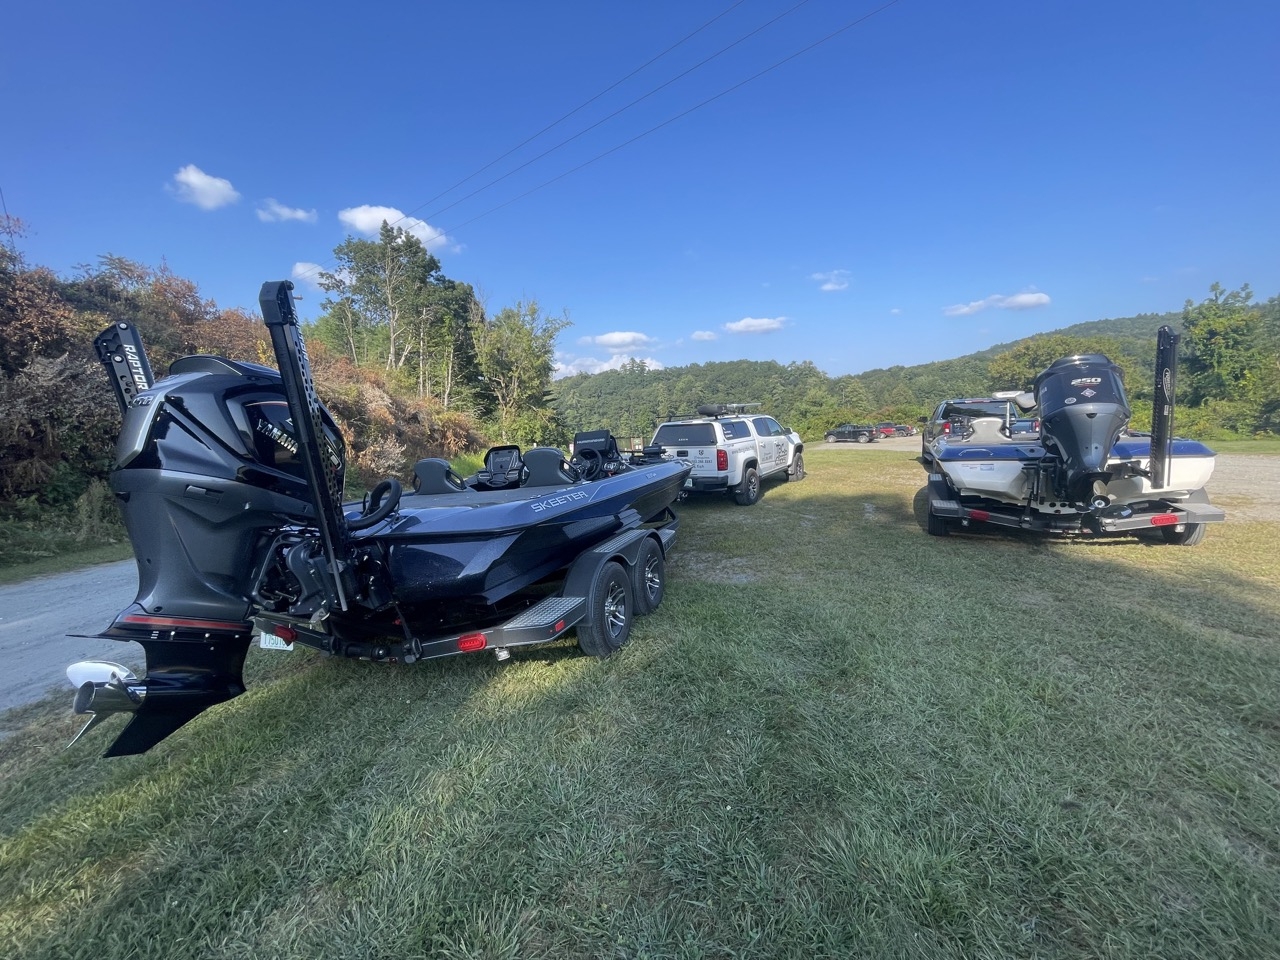 bass boat attached to truck on grass